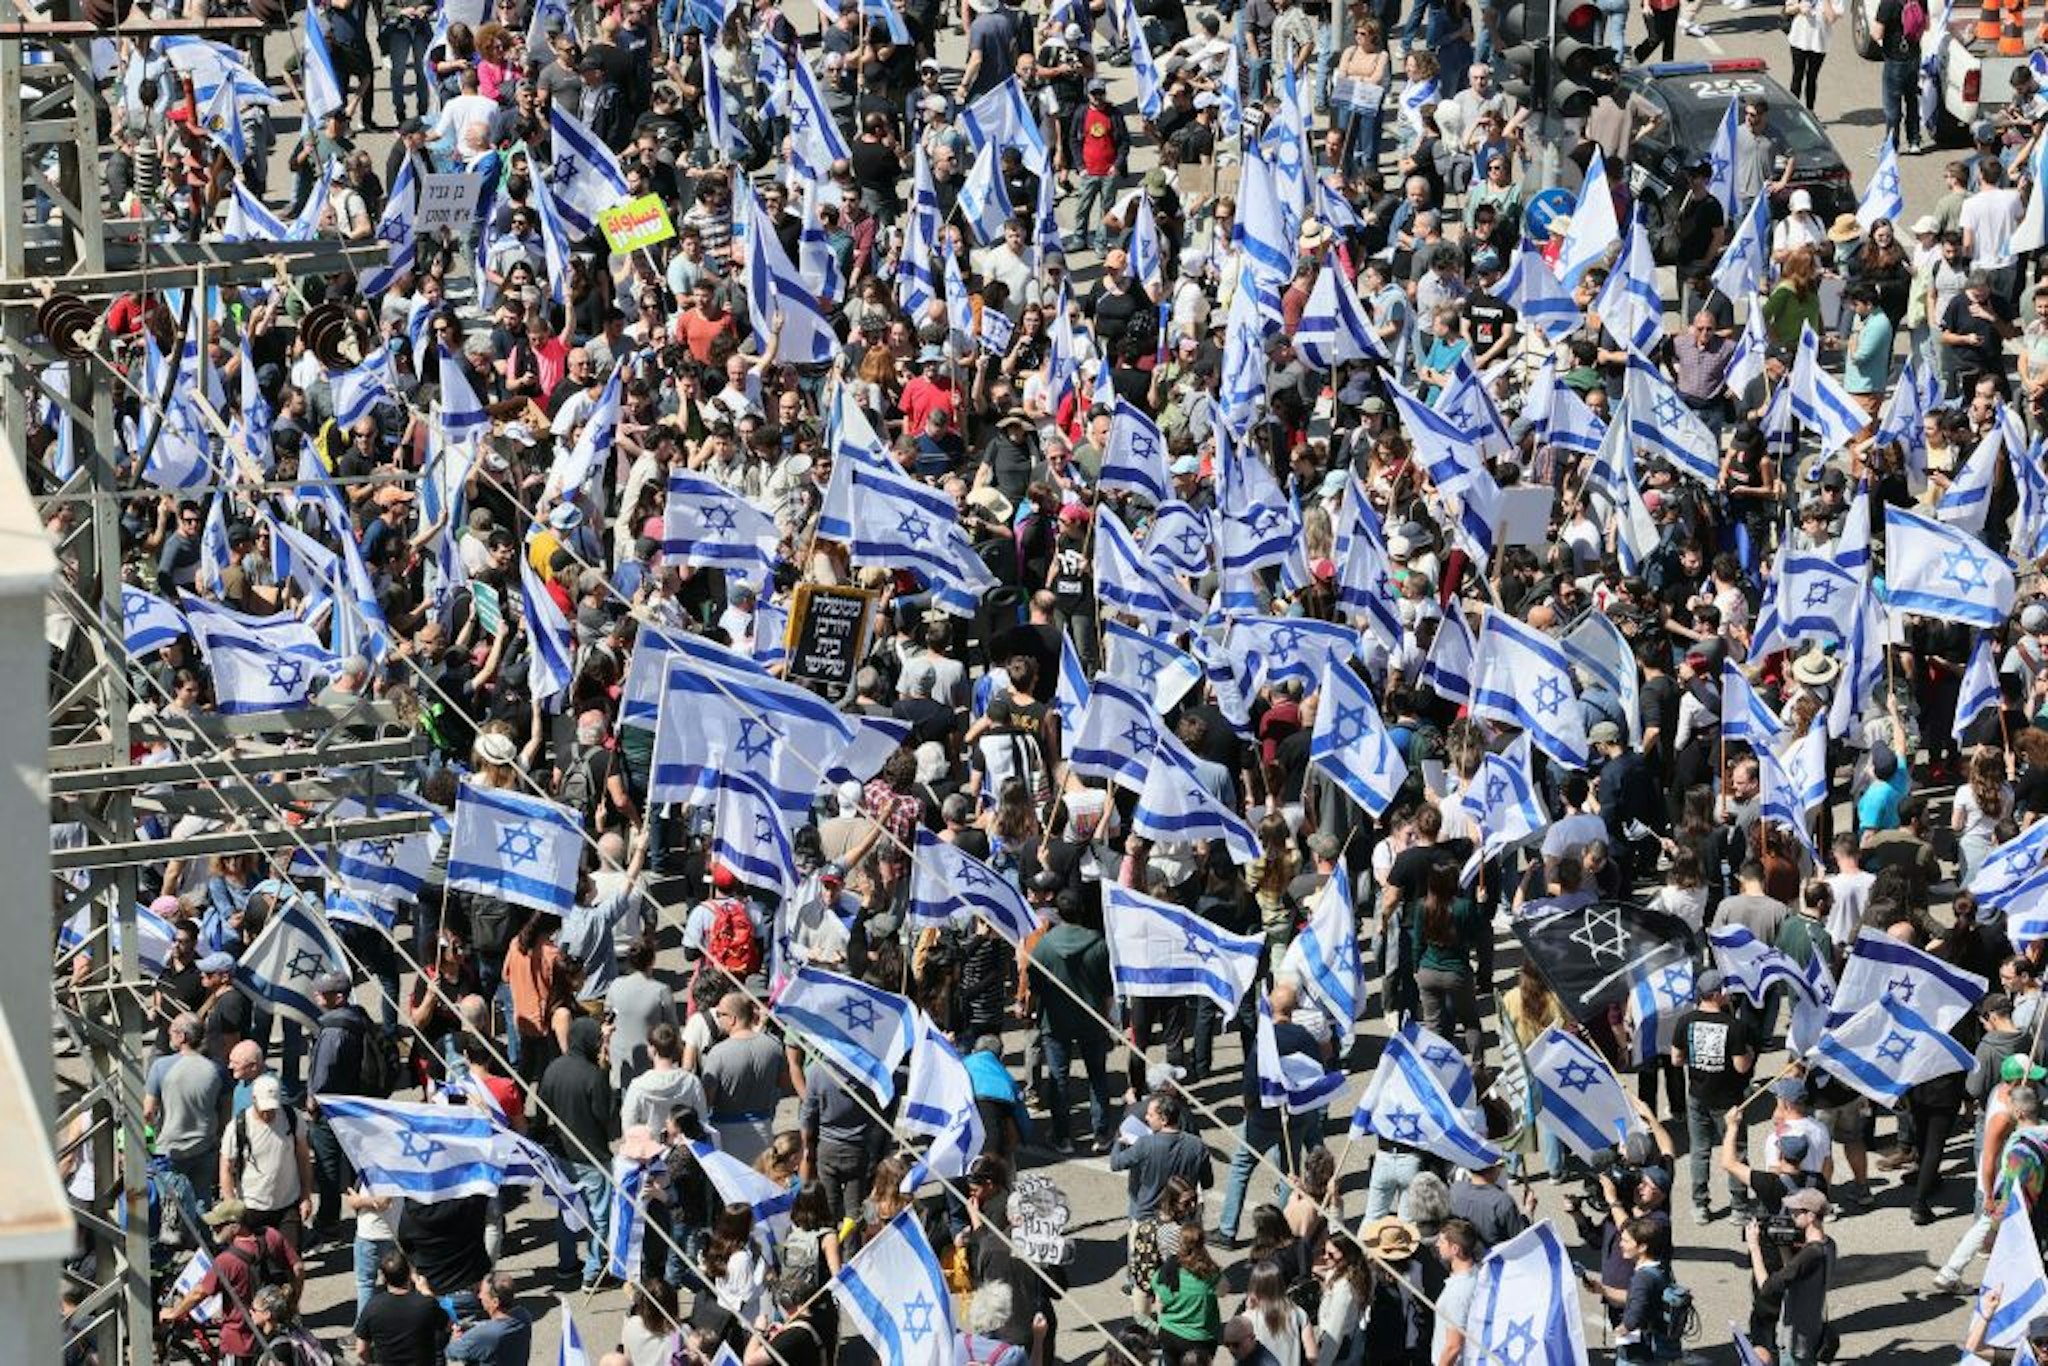 Israelis wave national flags as they protest against the government's controversial judicial reform bill in Tel Aviv on March 9, 2023. (Photo by JACK GUEZ / AFP)